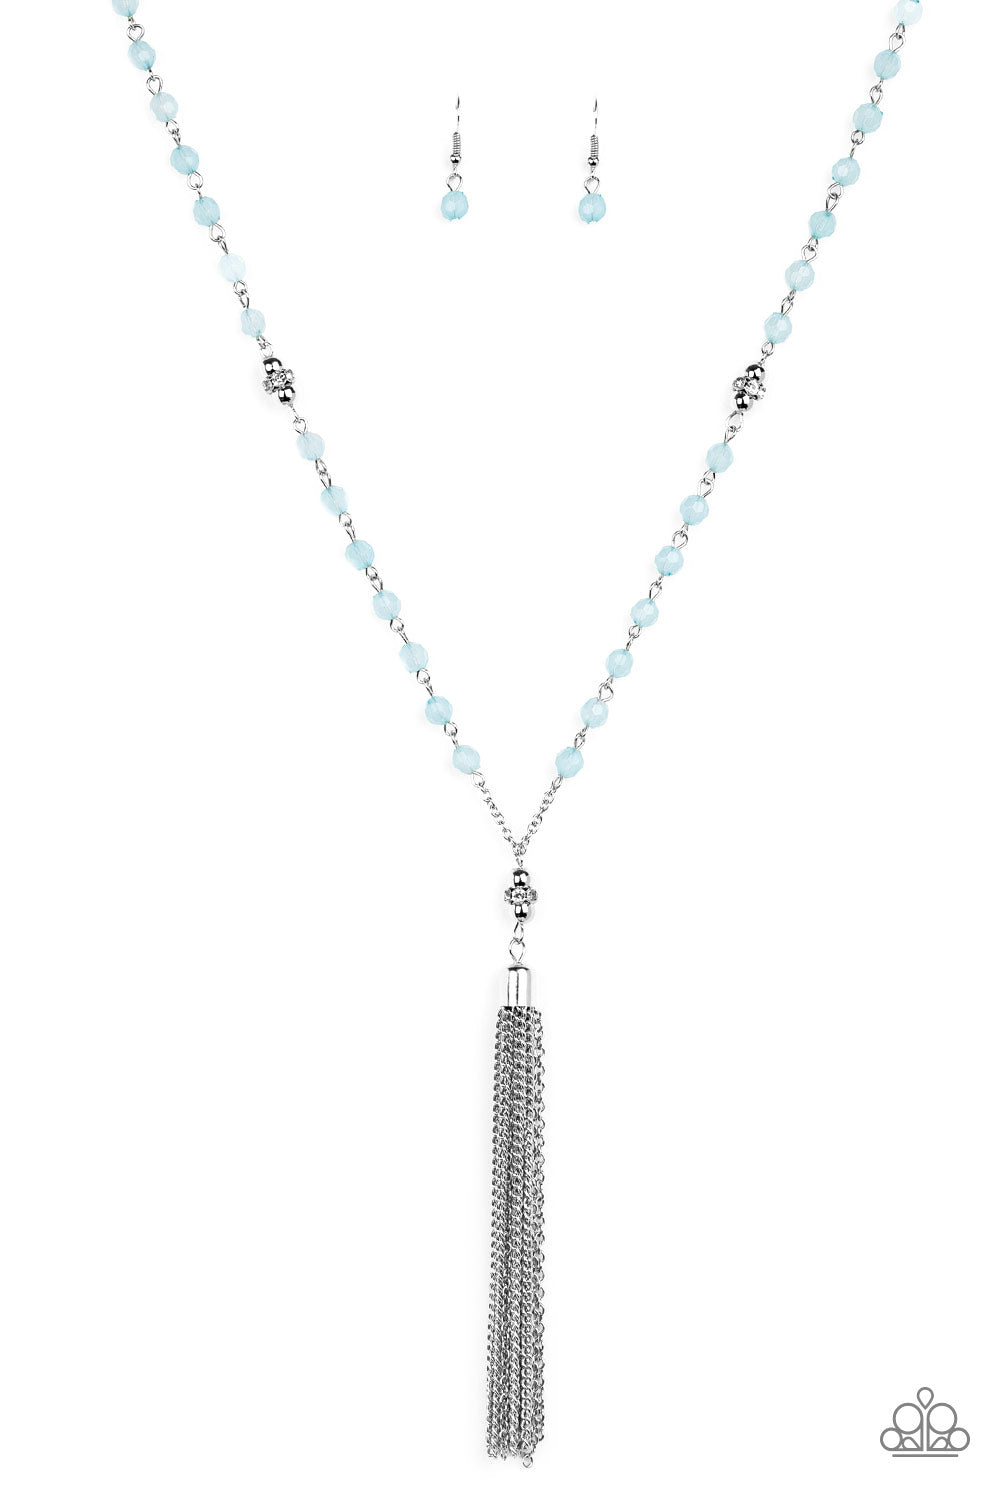 Tassel Takeover - Paparazzi - Blue Crystal Bead Silver Tassel Necklace